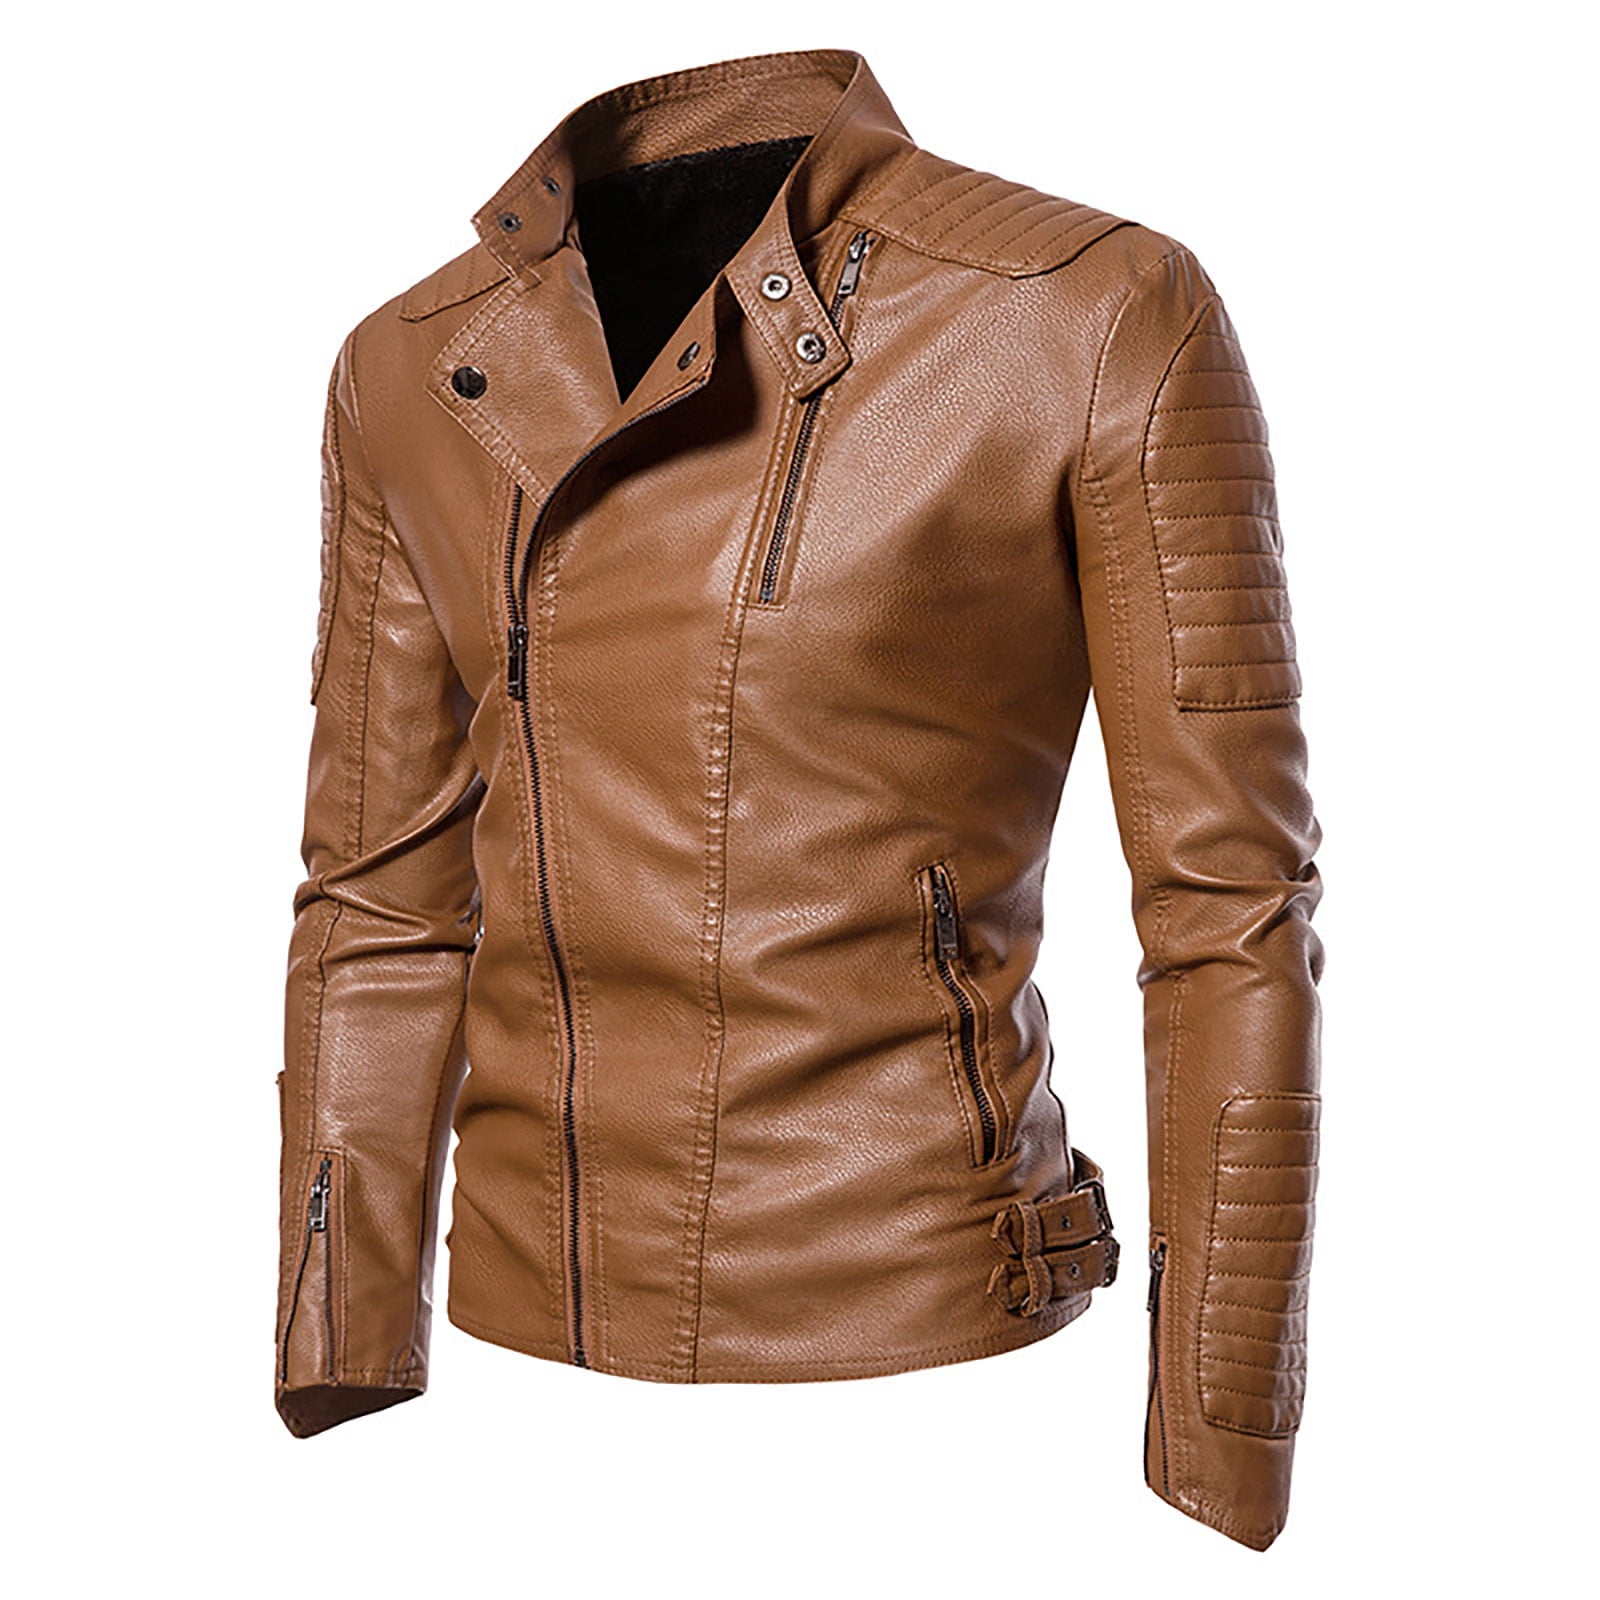 BVnarty Men's Solid Color Lapel Leather Motorcycle Jacket